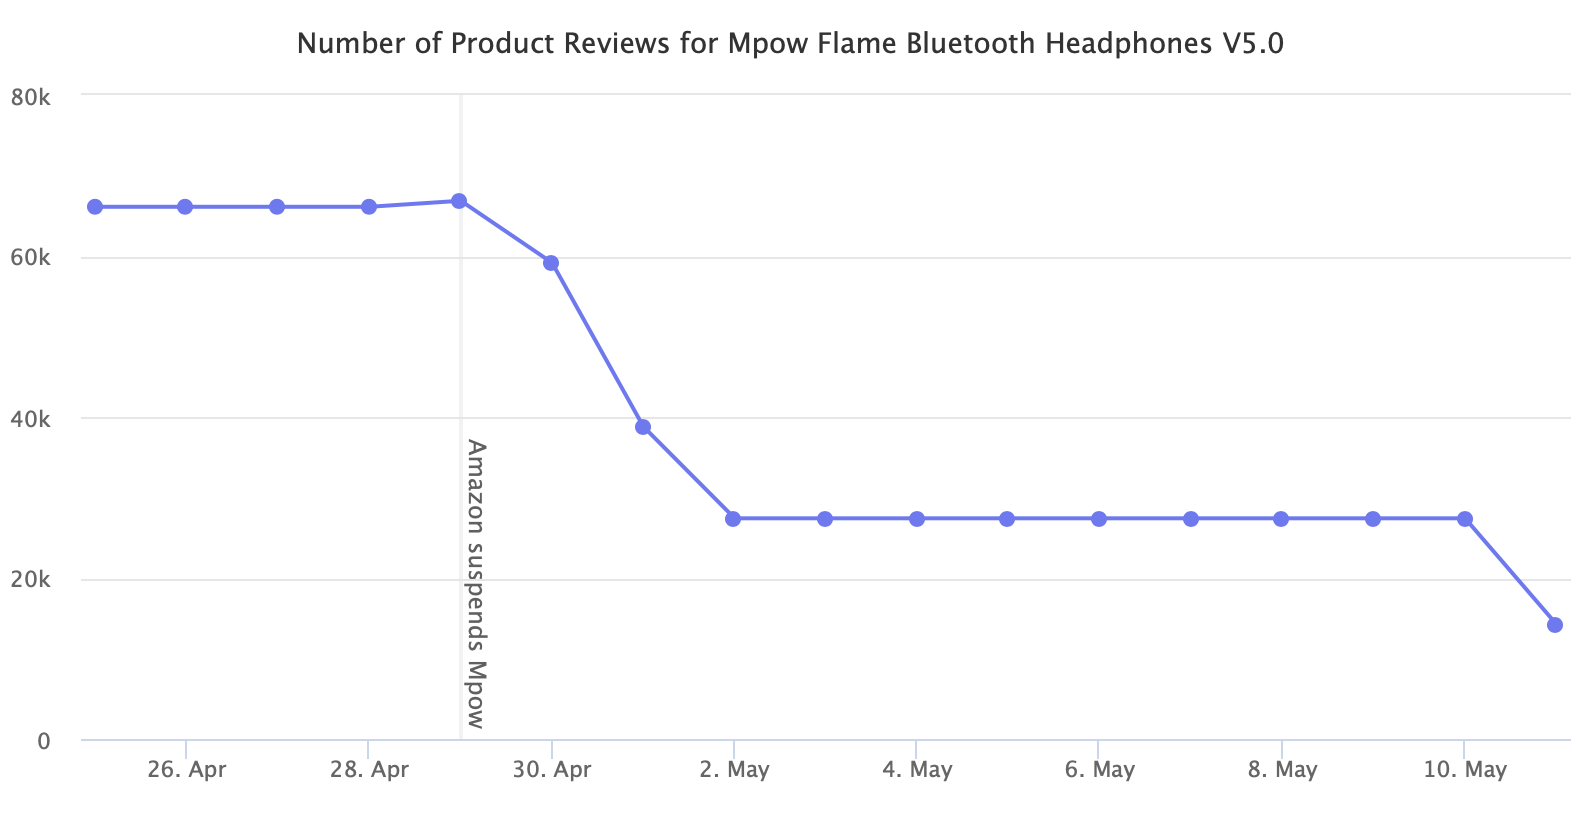 Number of Product Reviews for Mpow Flame Bluetooth Headphones V5.0